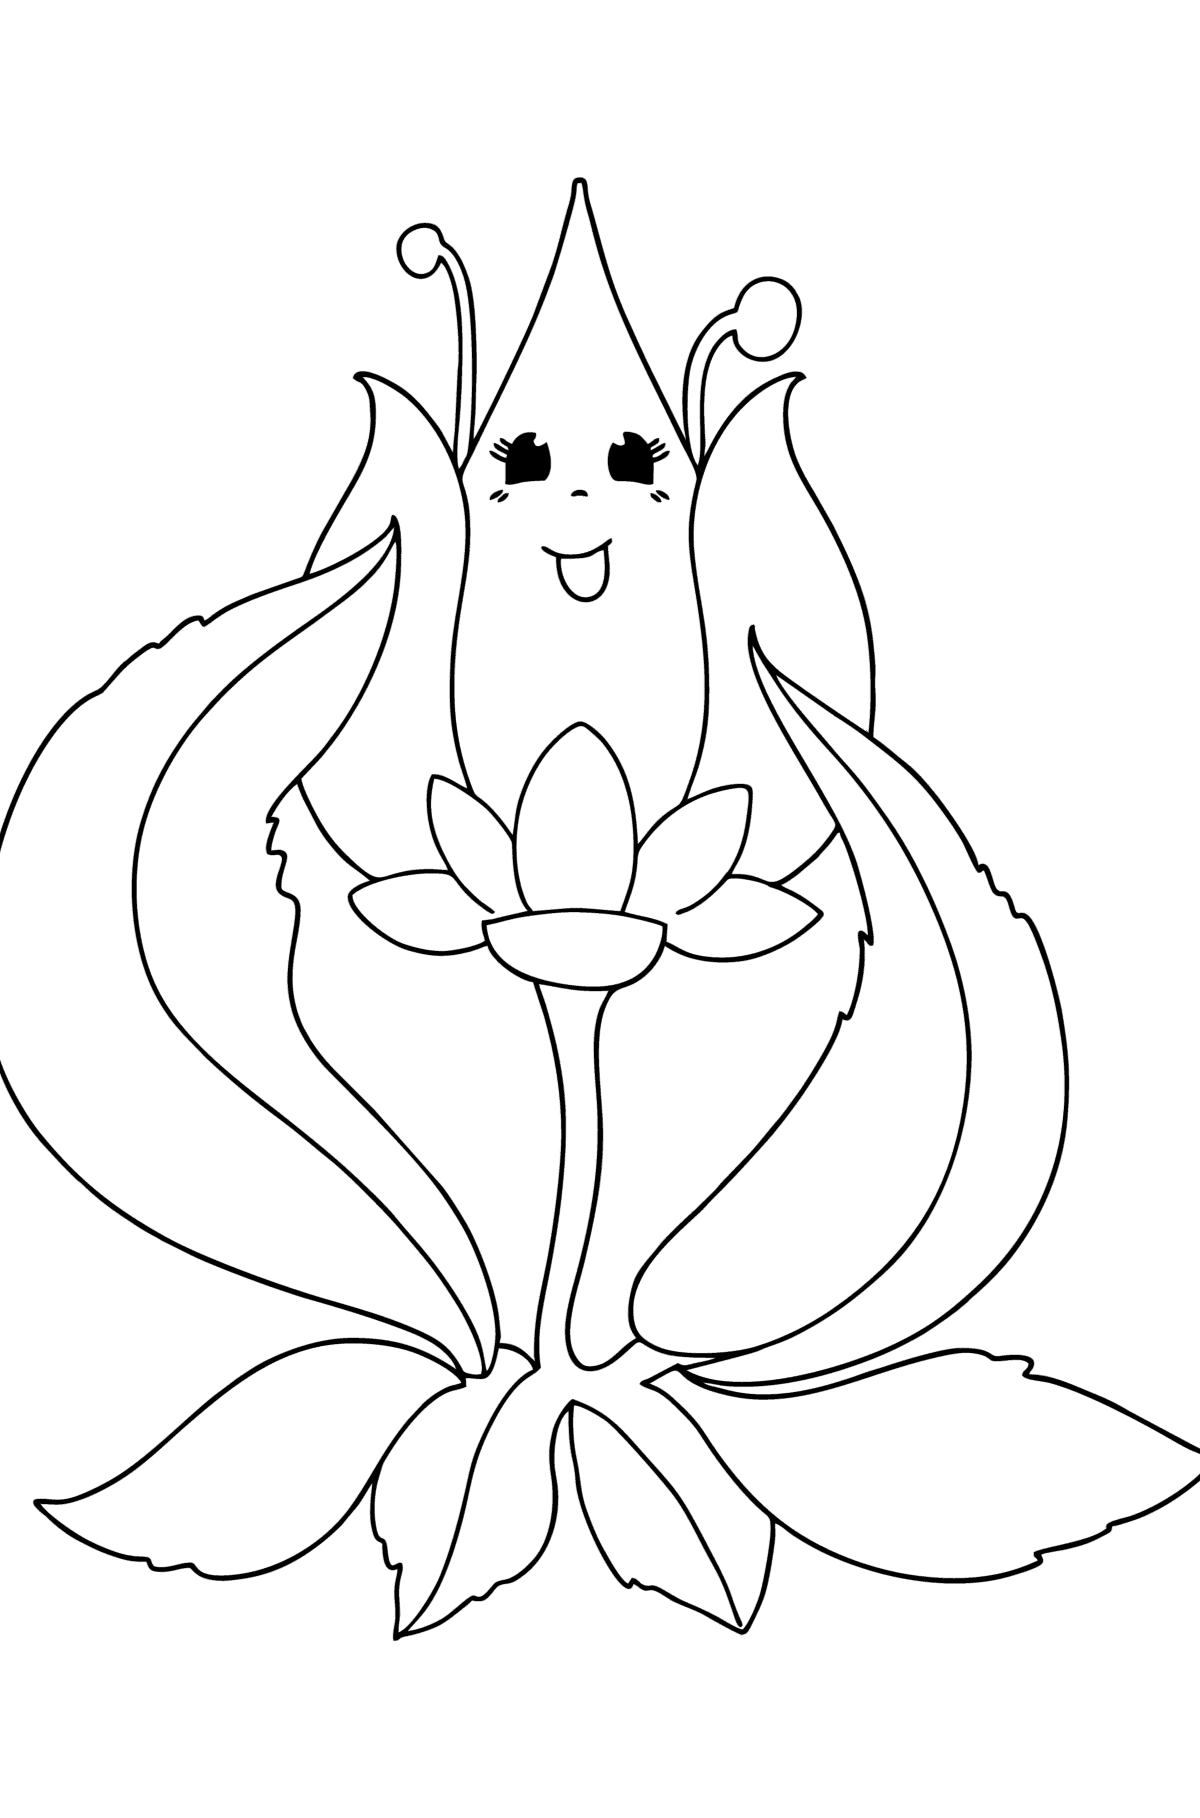 Bud with eyes coloring page - Coloring Pages for Kids